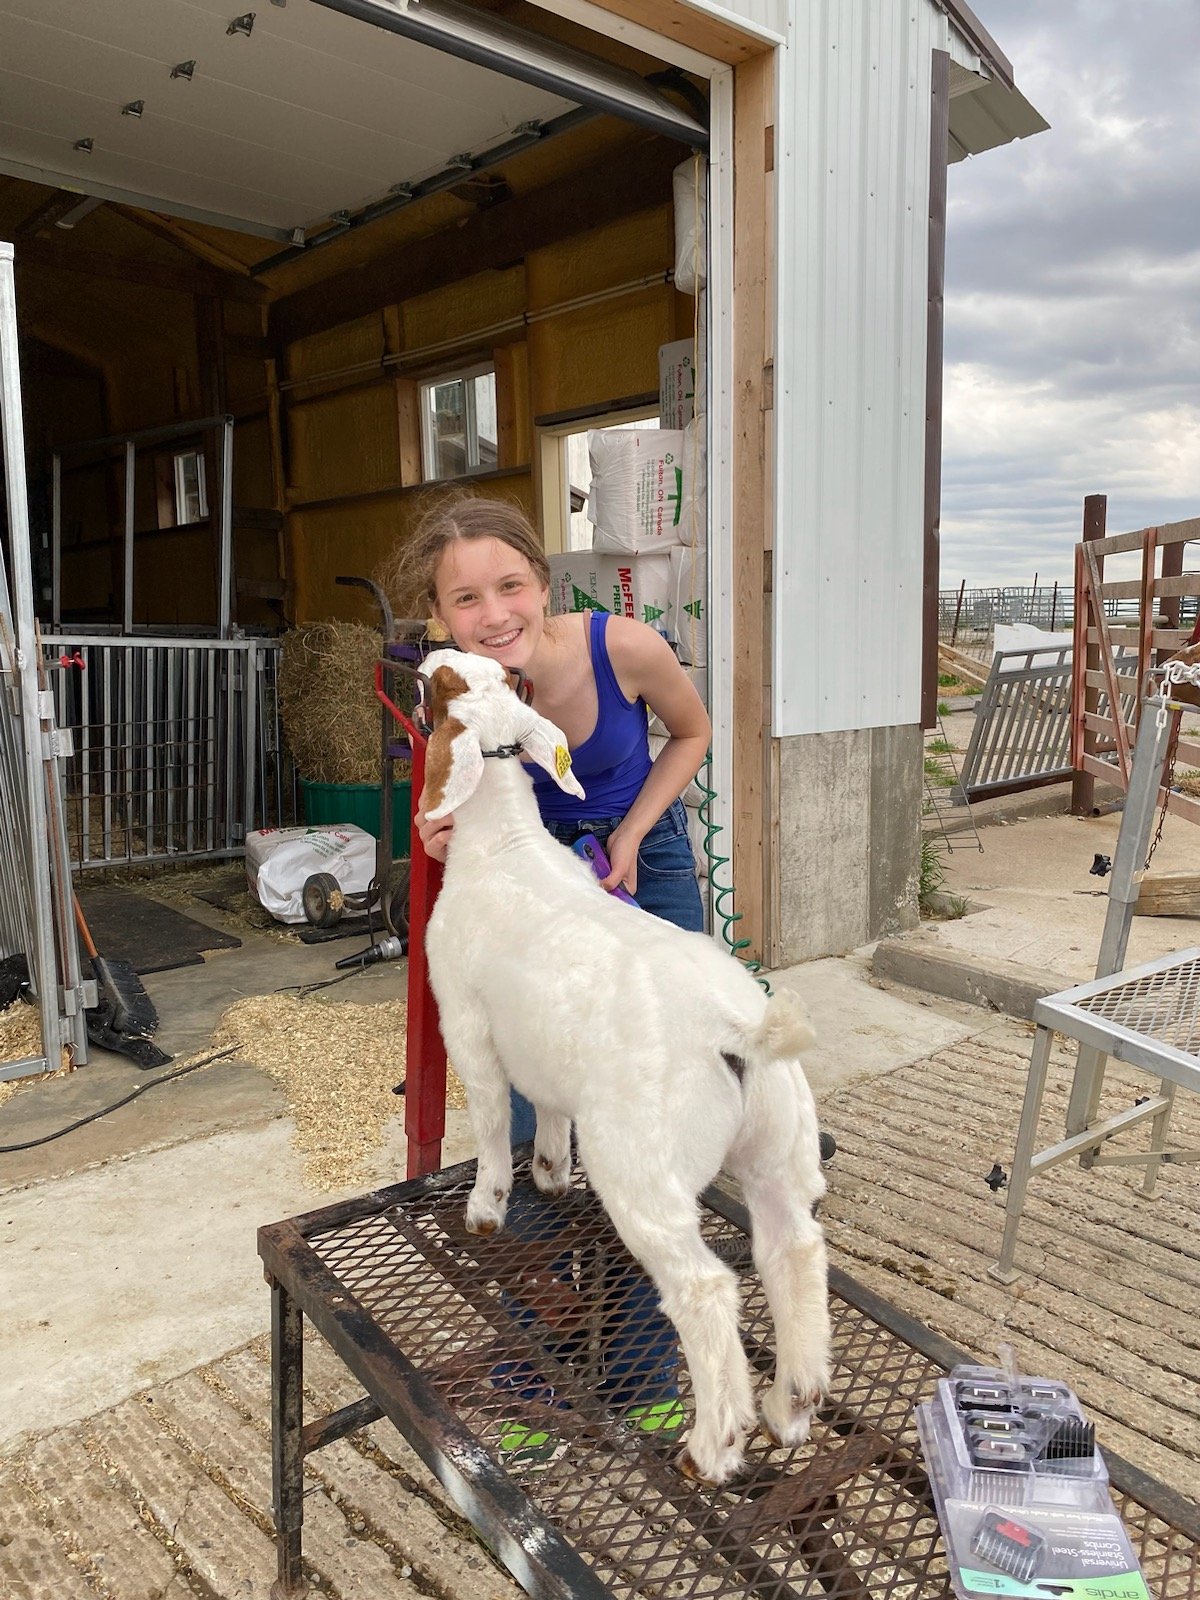 Harper and One of Her Goats